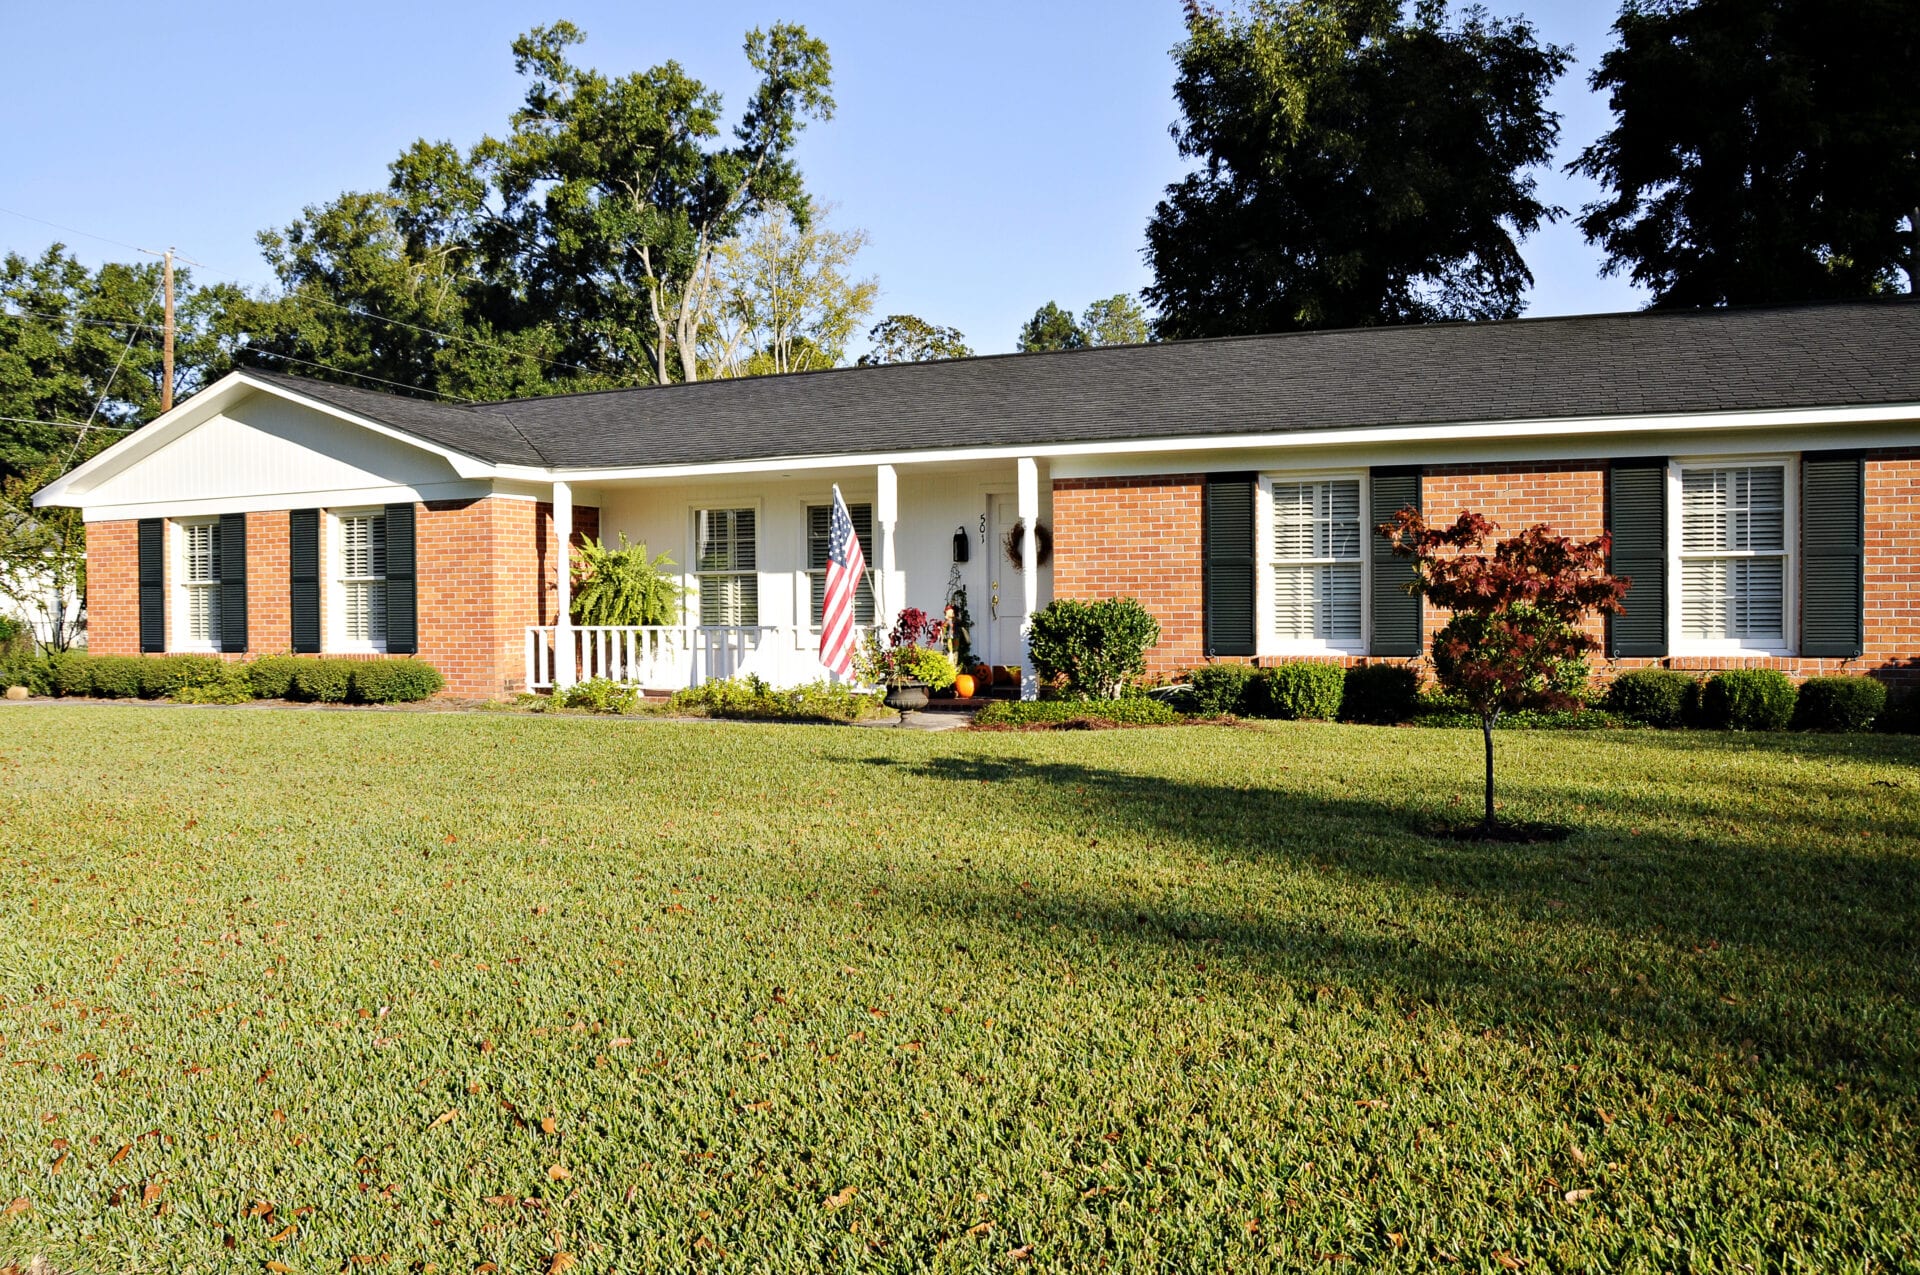 Lovely Ranch style home of red brick, white trim and black shutters with an American Flag.